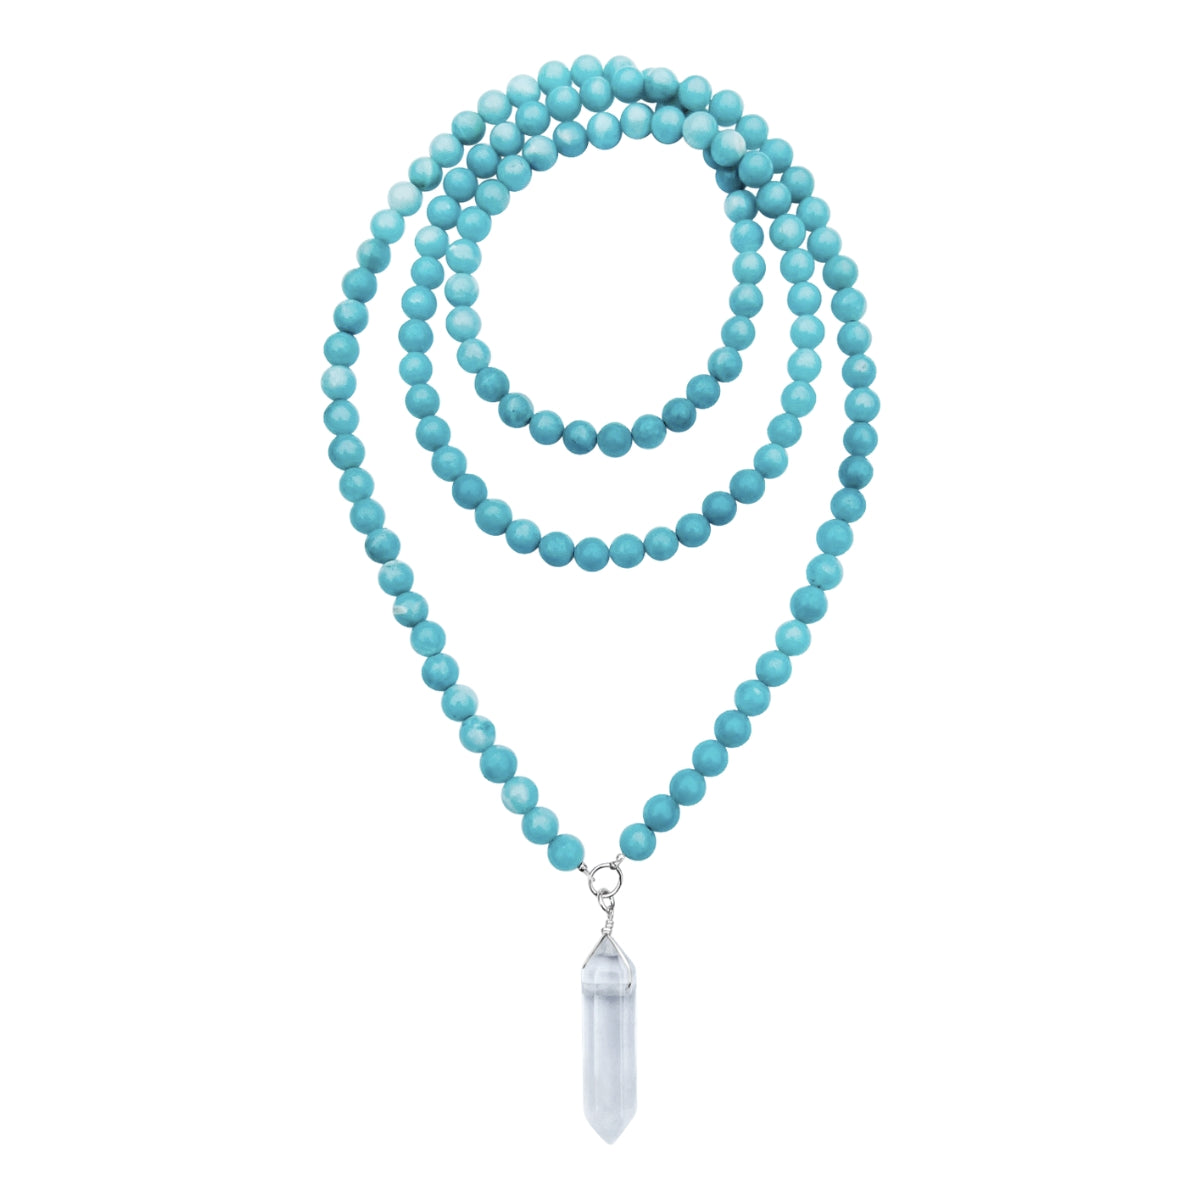 The Intuition Infusion Amazonite and Crystal Necklace is a perfect accessory for yogis and mindfulness-oriented individuals who seek to enhance their spiritual practices and connect with their higher selves.